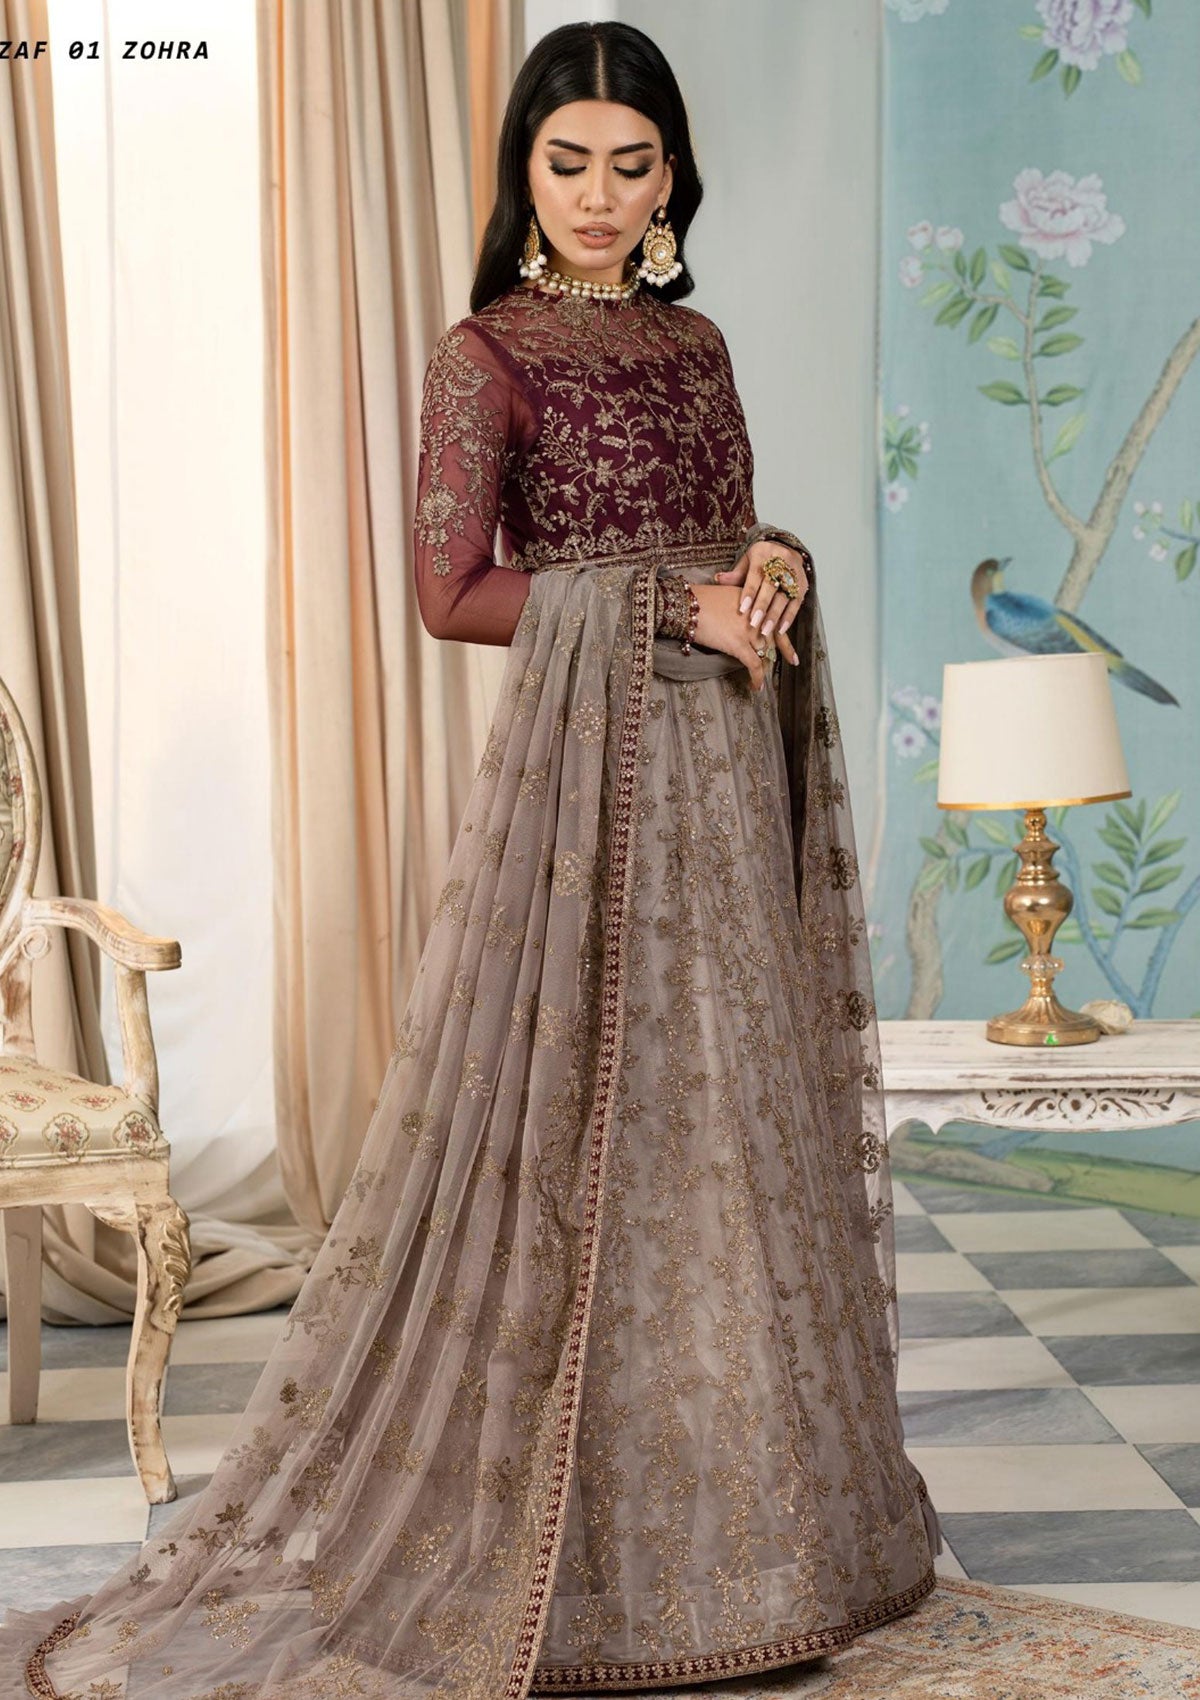 Formal Collection - Zarif - AFSANAH - AFE24#01 - ZOHRA